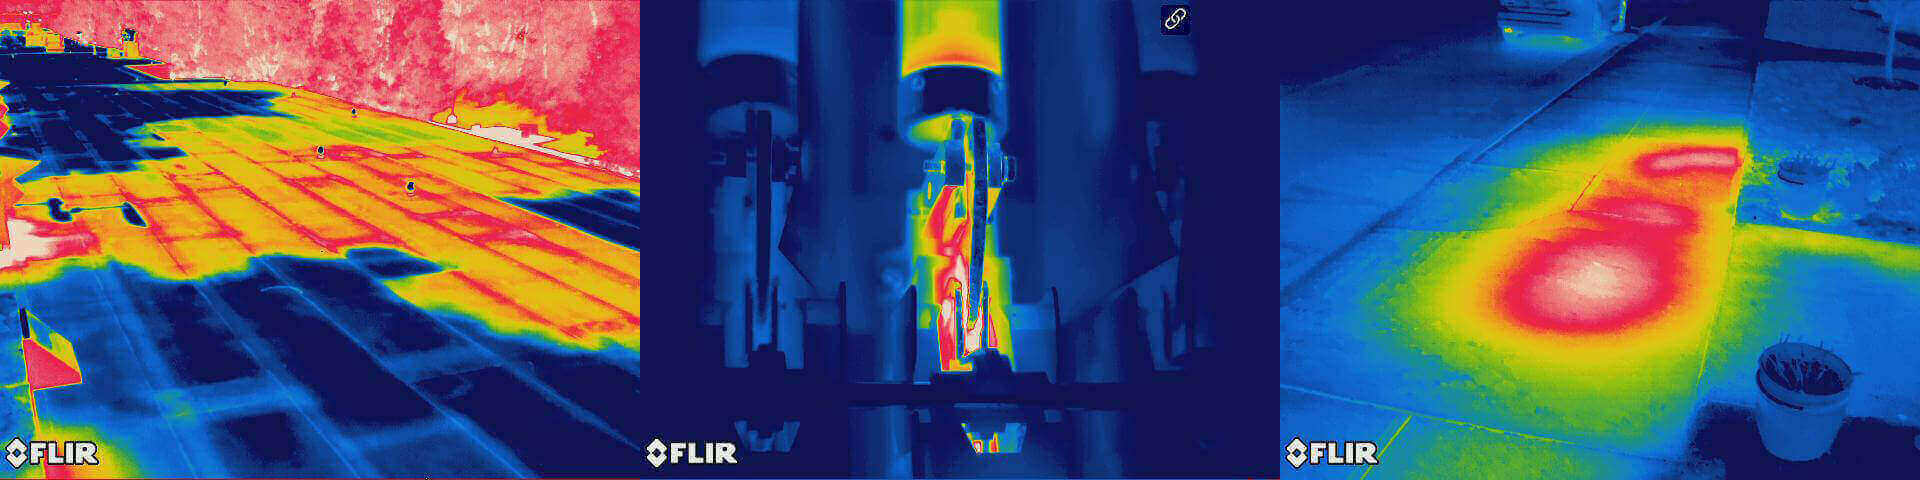 Residential Energy Scan IR, Infrared Inspection For Energy Loss - Albany,  NY